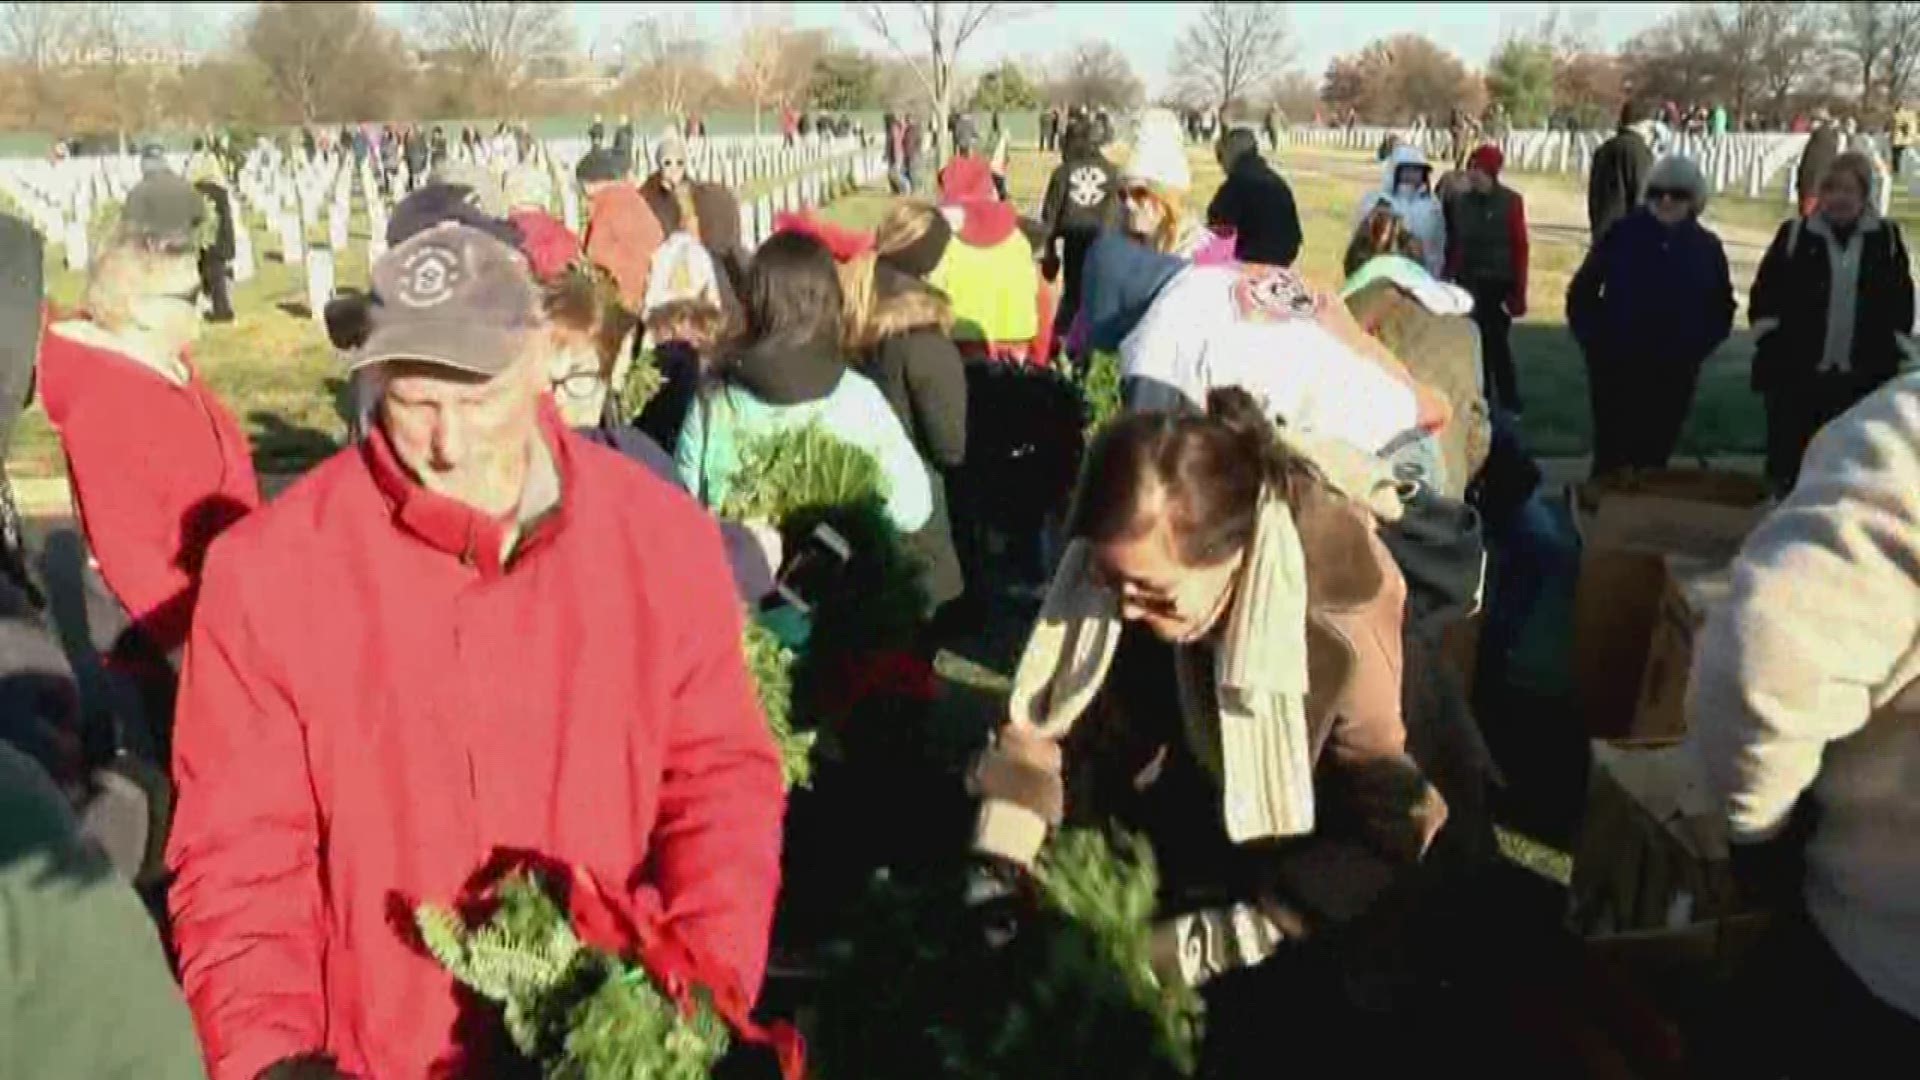 Last week, the group only had 900 of the 3,100 wreaths it needed for the Texas State Cemetery.